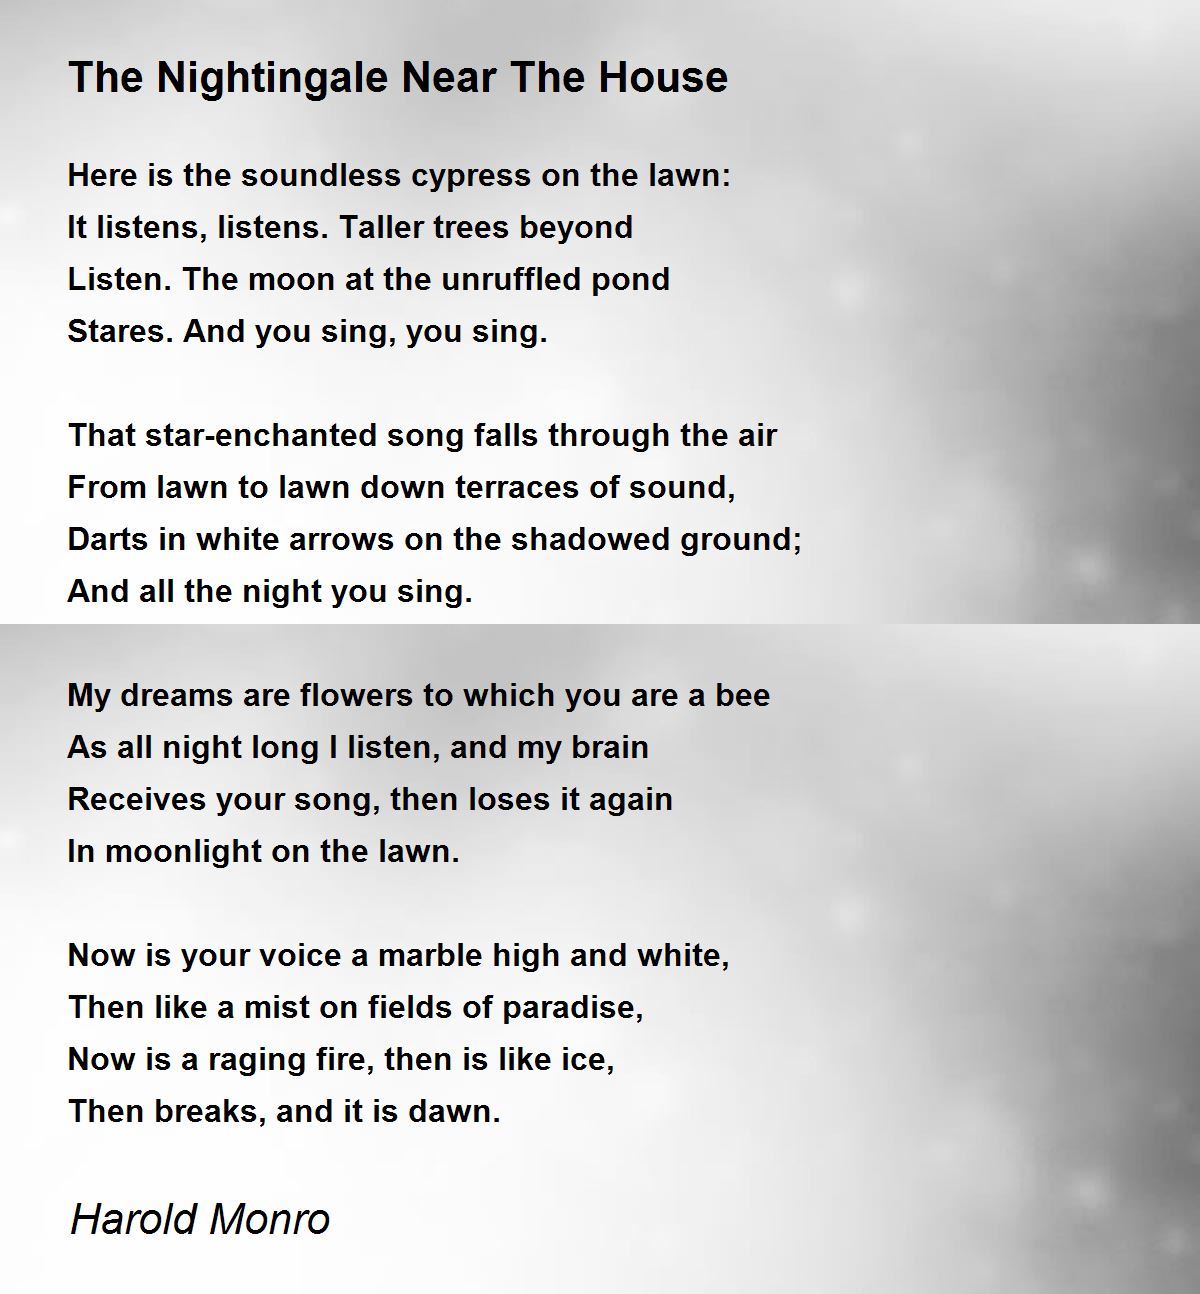 Call The Nightingale Again. - Call The Nightingale Again. Poem by